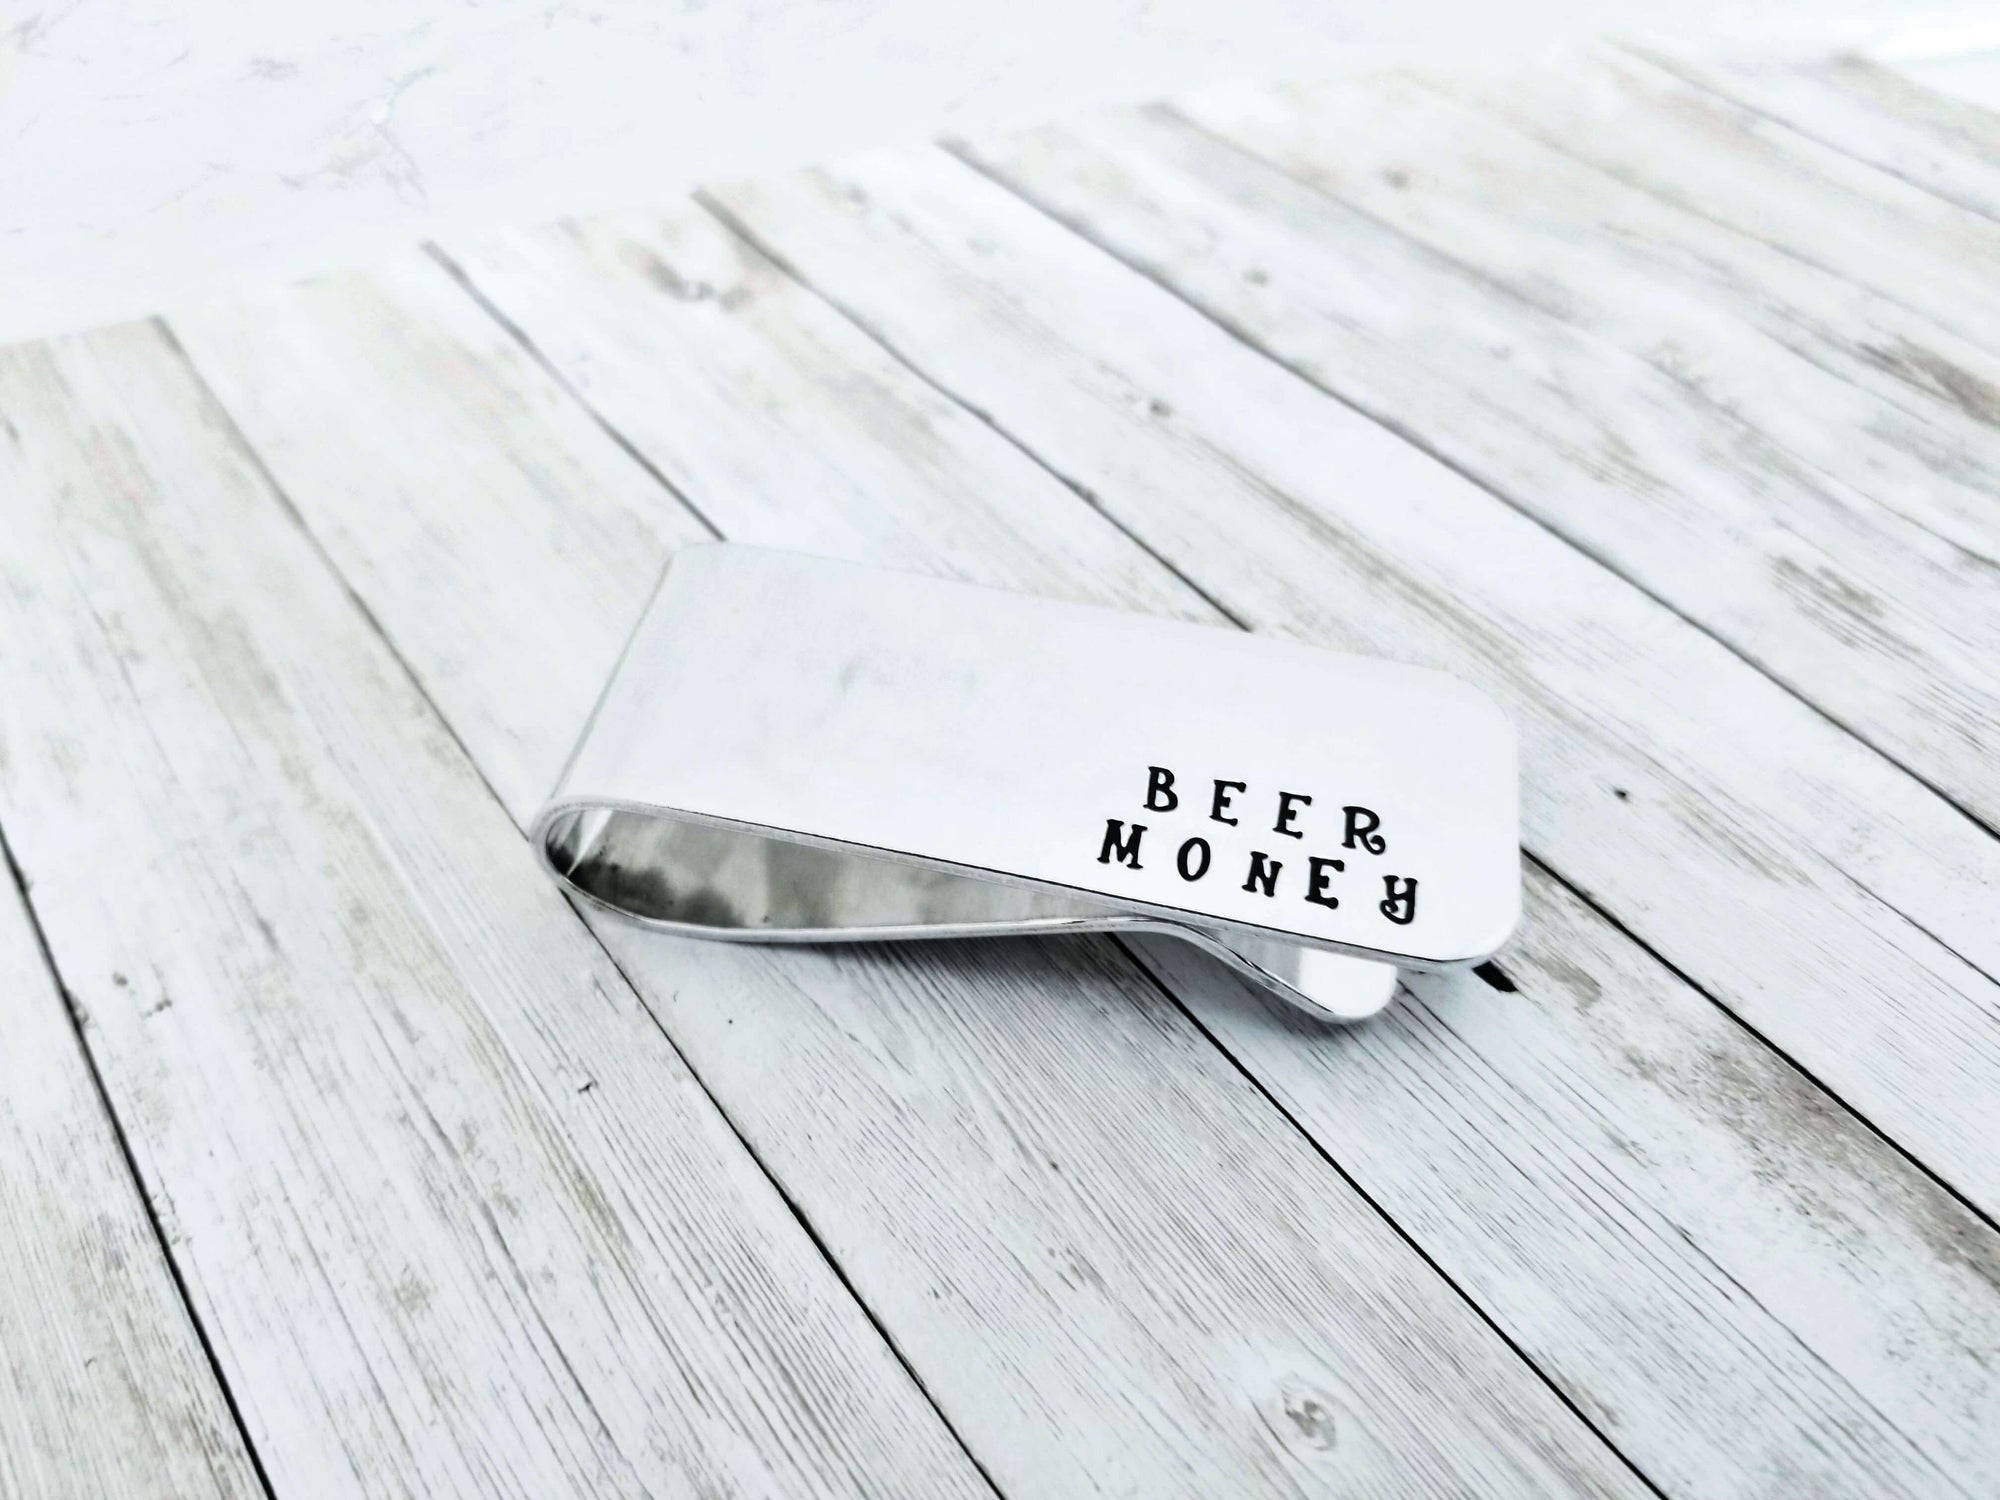 Beer Money Clip, Custom Money Clip, Funny Dad Gift #1 Dad, Fathers Day Gift, Gift for Dad, Gift